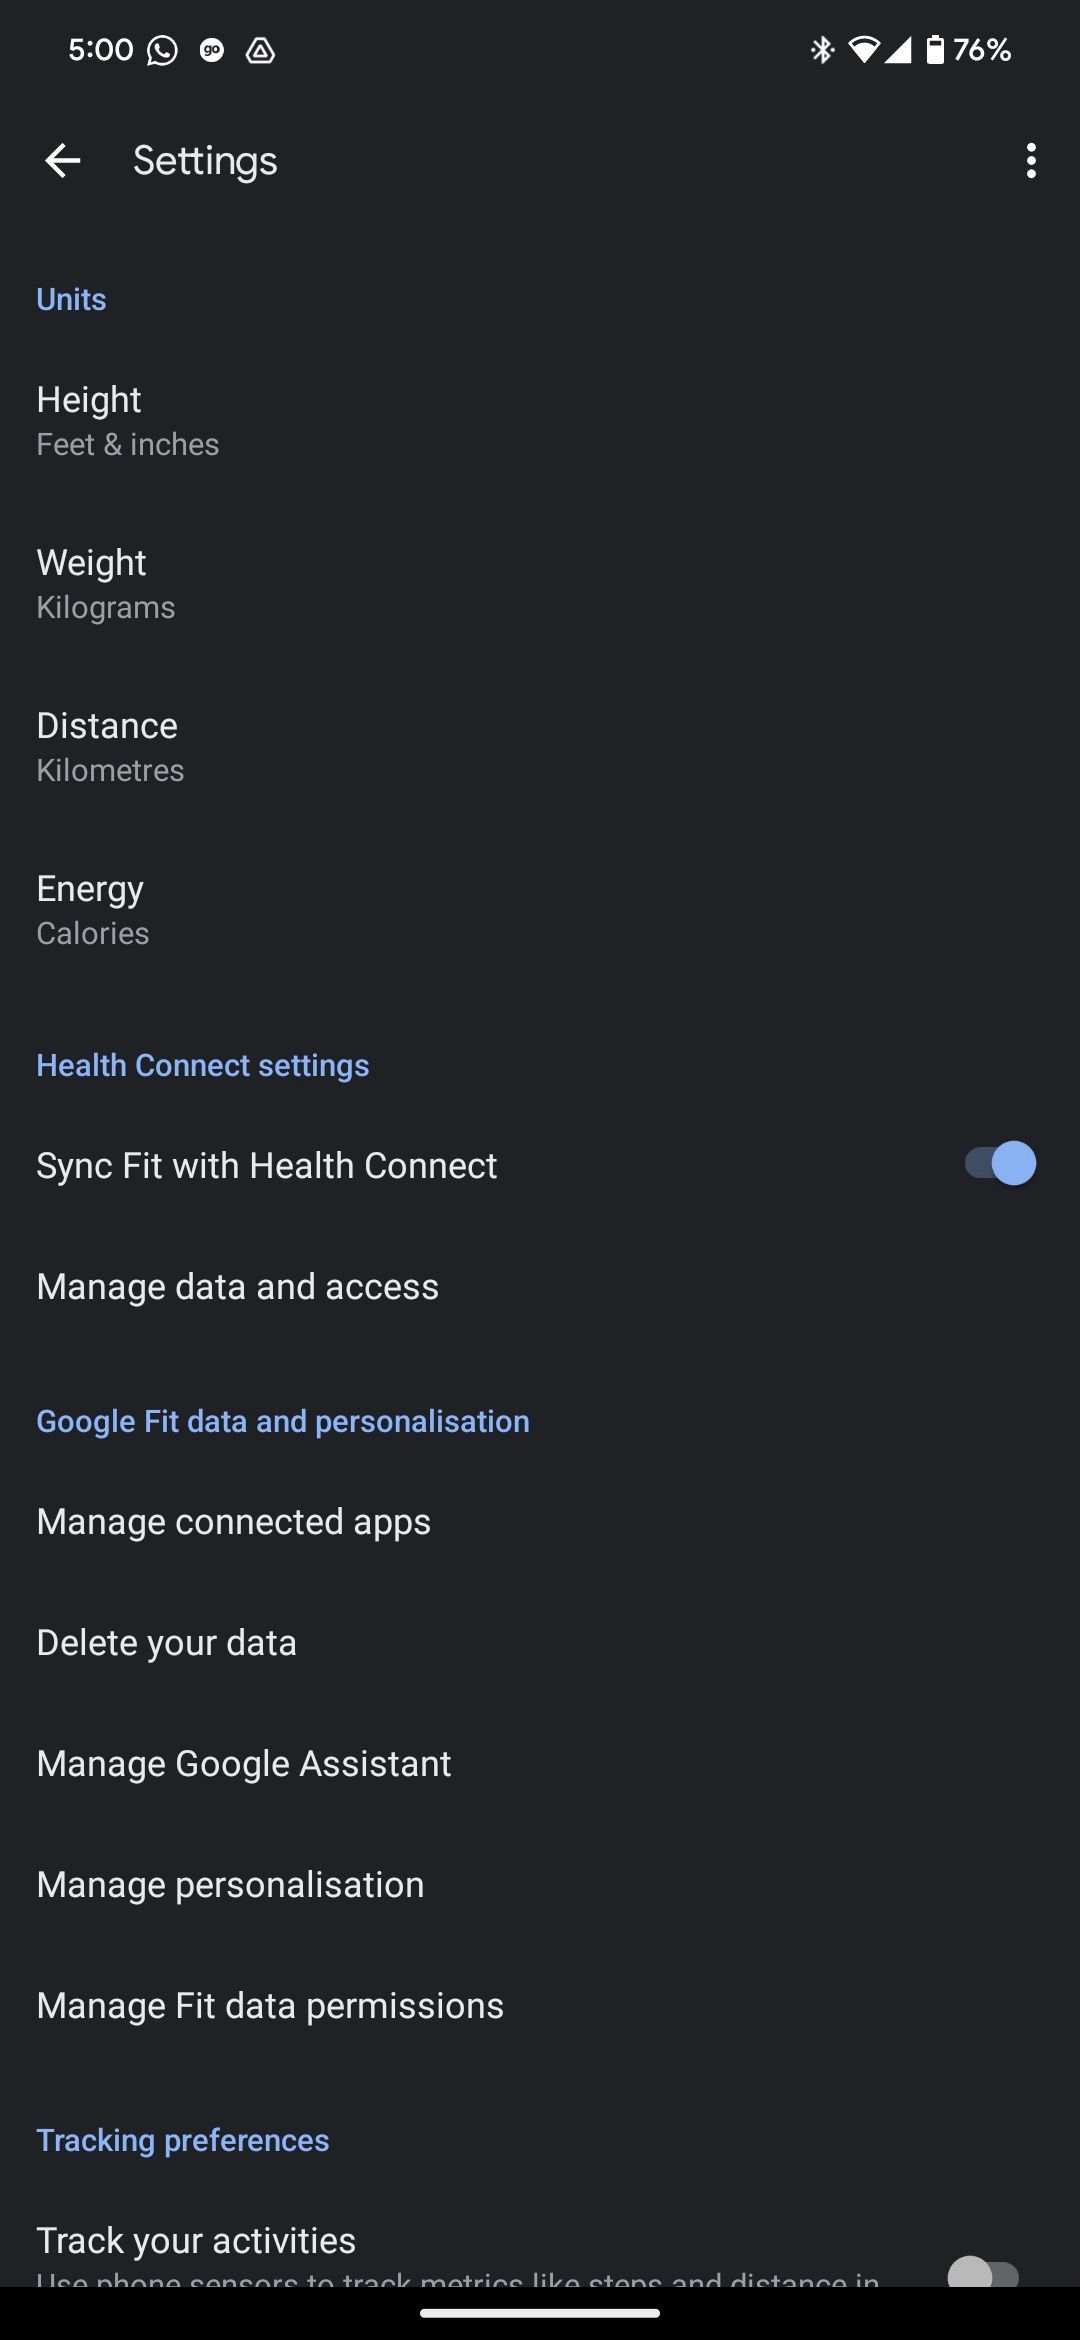 Google-Fit-Health-Connect-sync-1